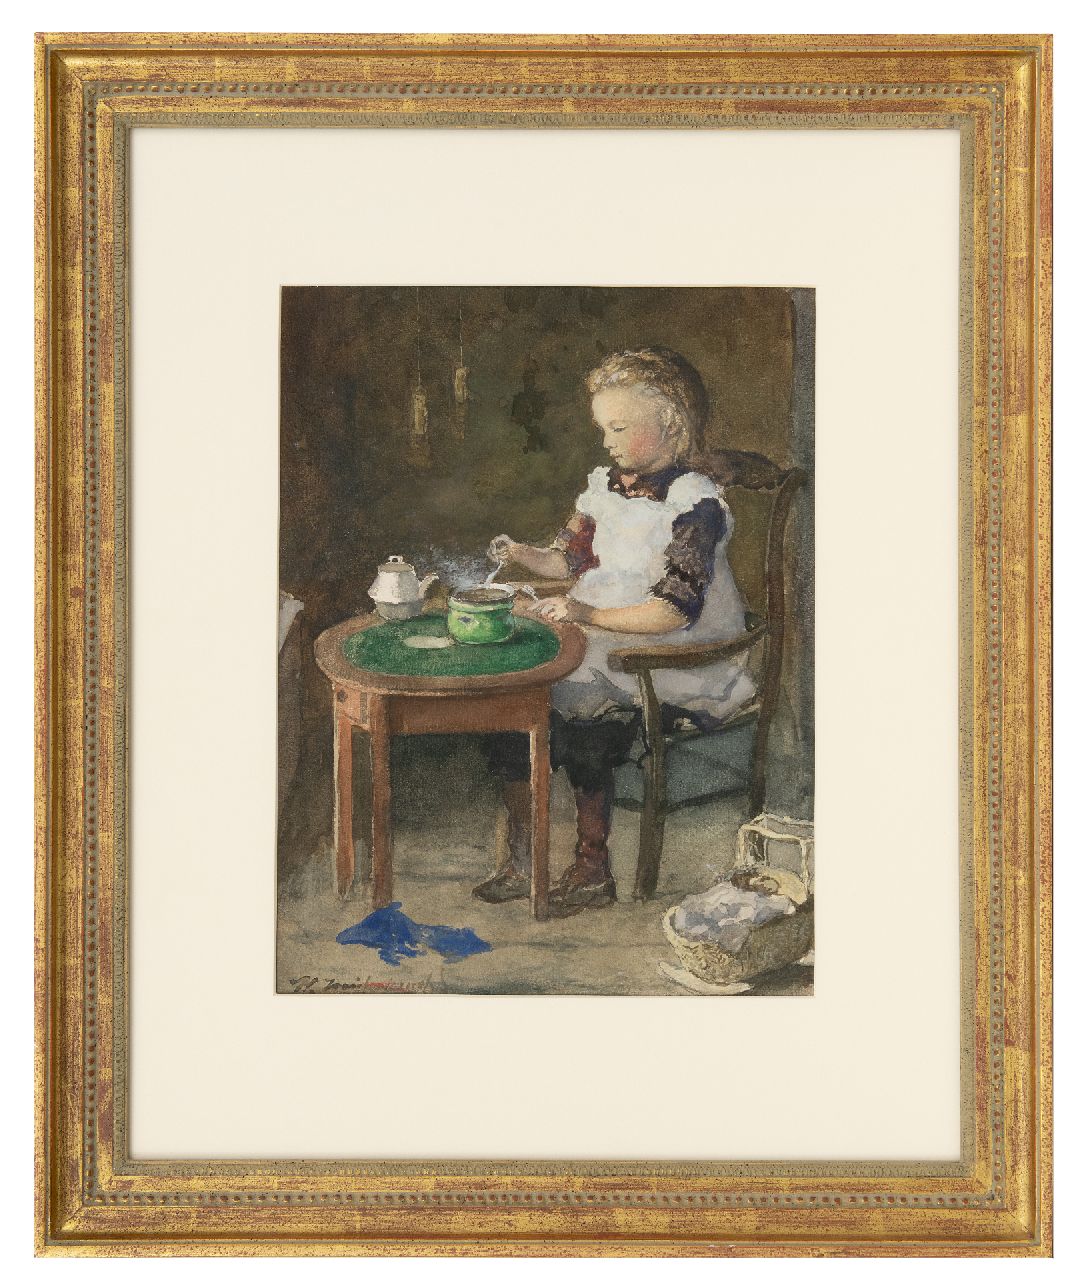 Weissenbruch H.J.  | Hendrik Johannes 'J.H.' Weissenbruch | Watercolours and drawings offered for sale | Baking a pancake, watercolour on paper 35.2 x 27.0 cm, signed l.l.